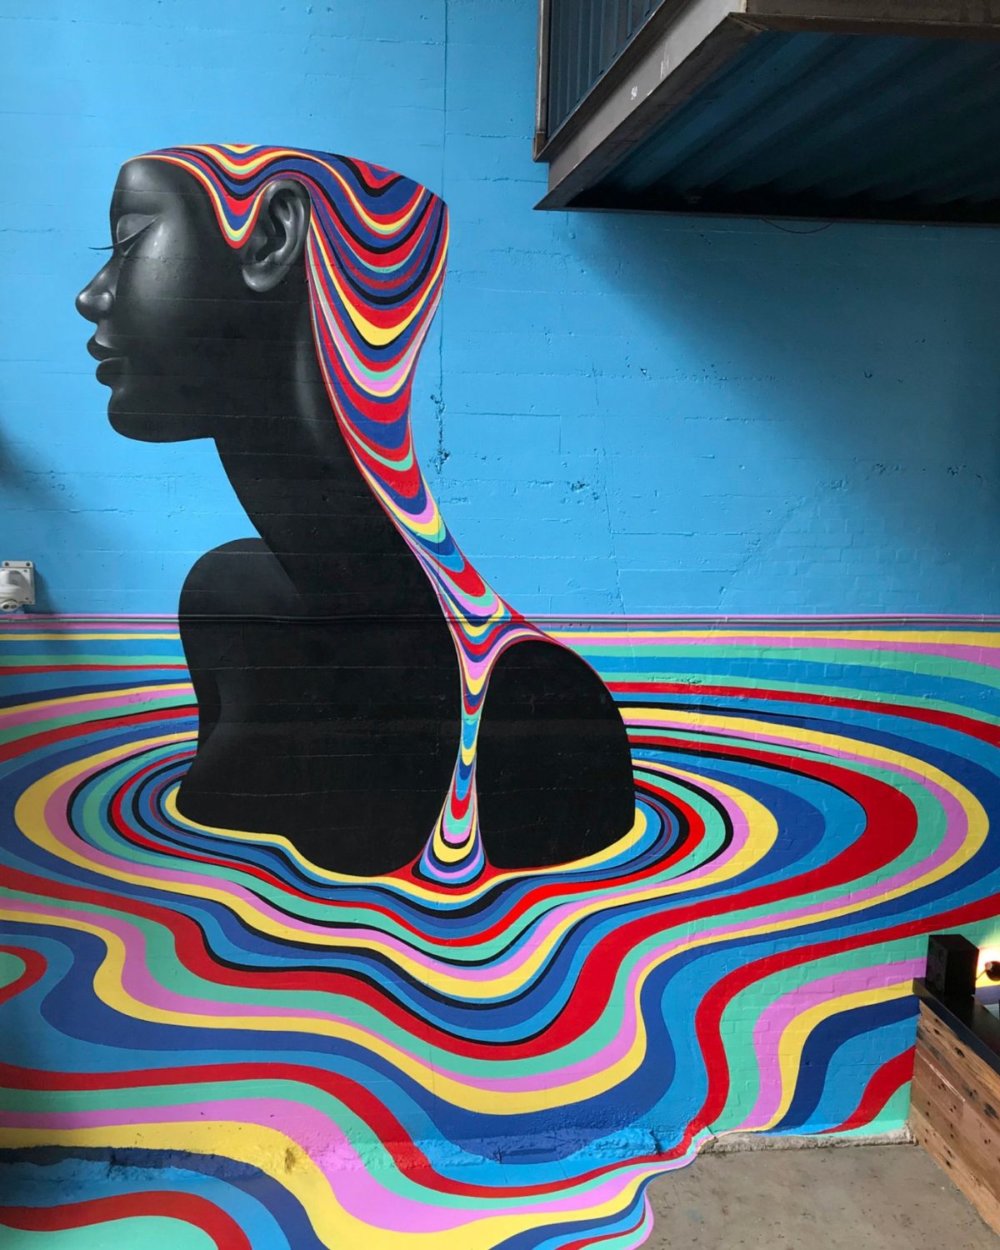 Murals Of Monochromatic Figures Pouring Colorful Fluids By Gina Kiel 16